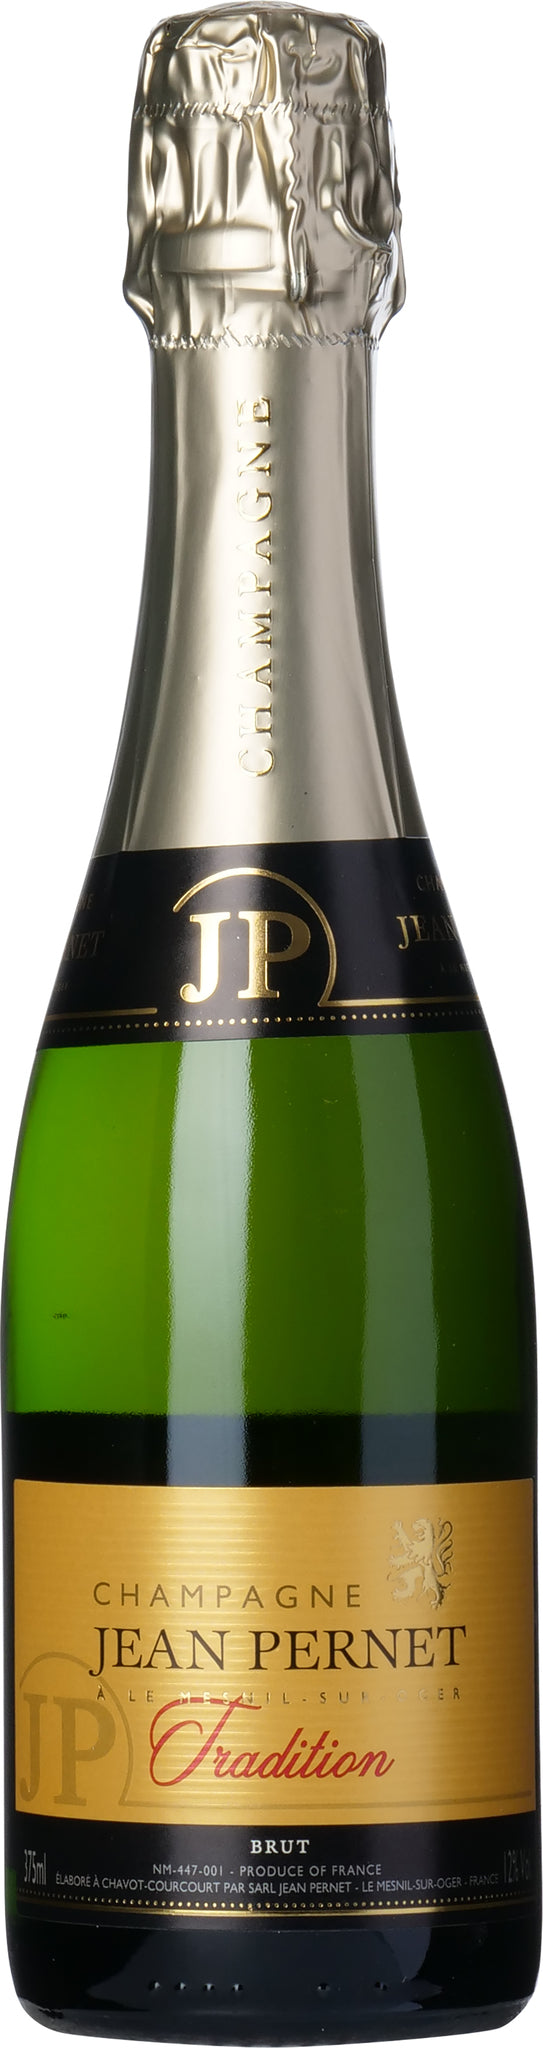 Jean Pernet Tradition Brut Champagne 375ml